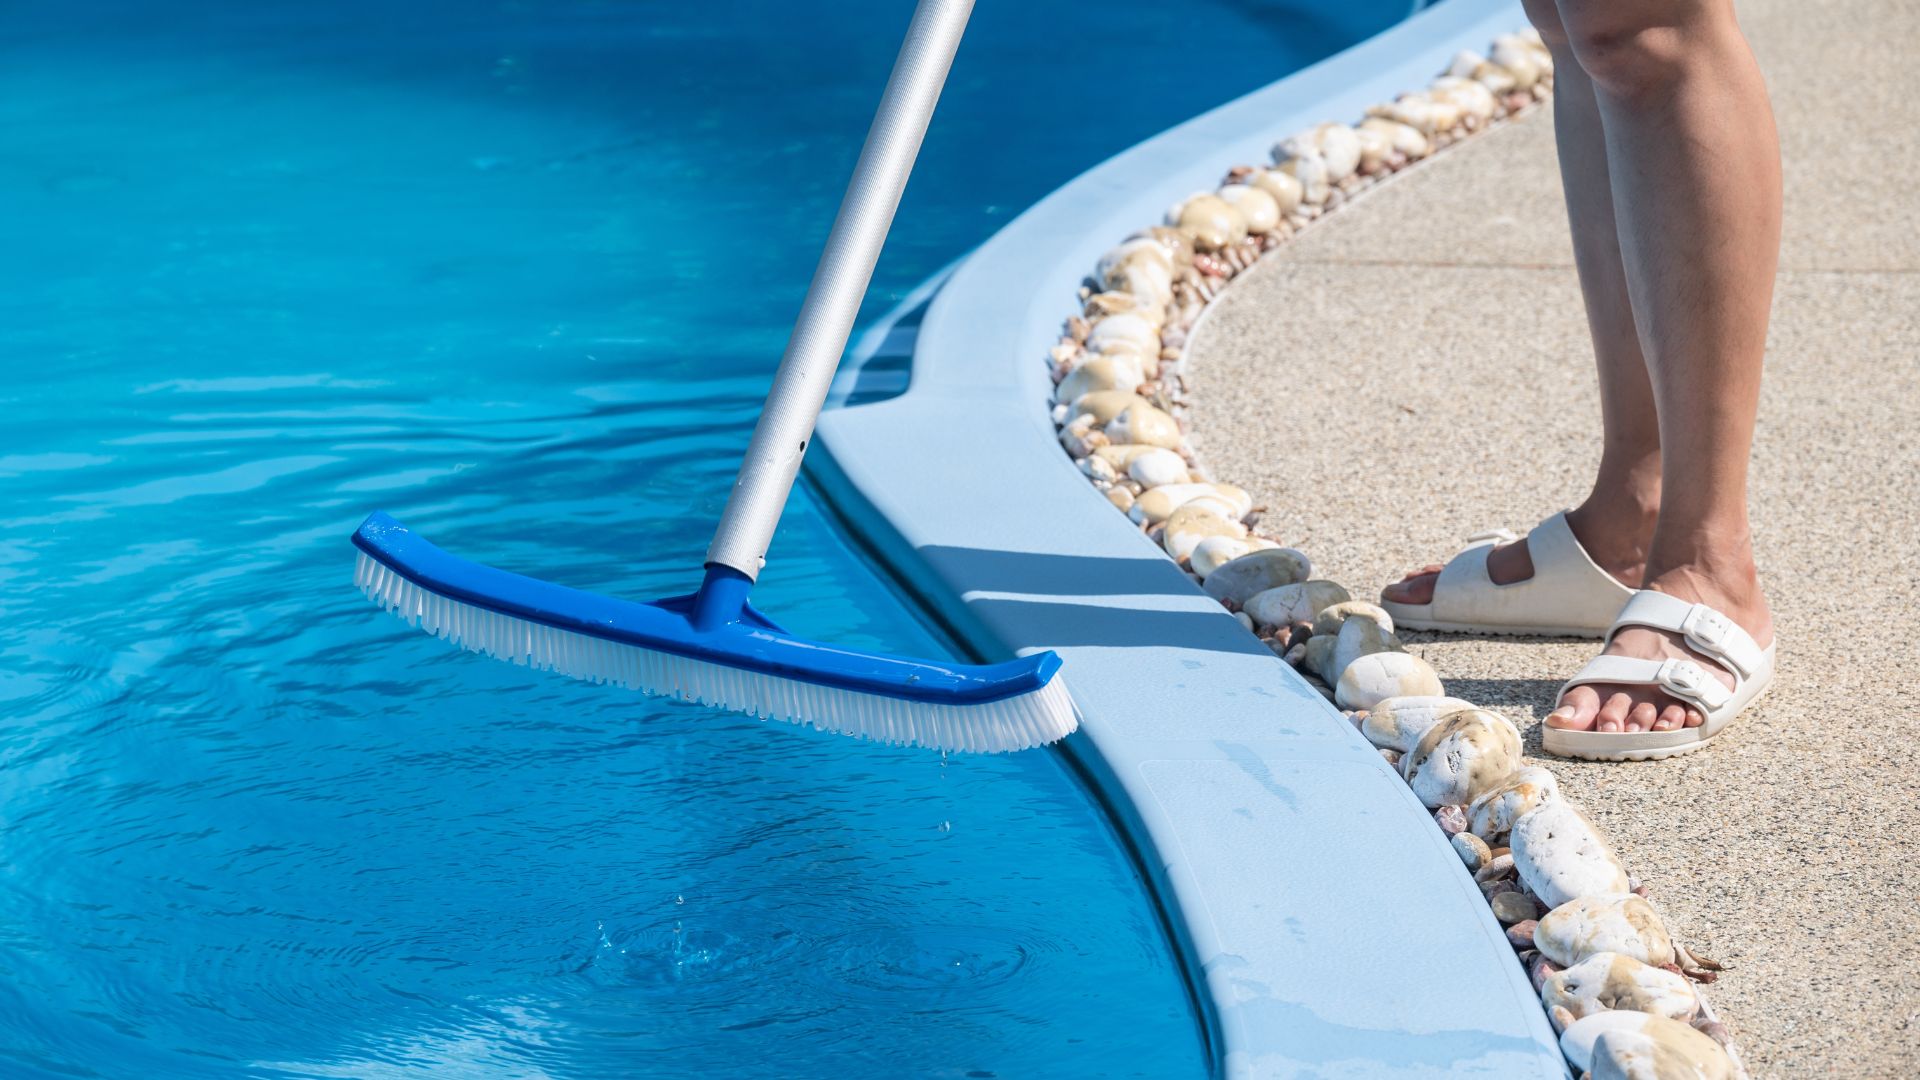 A person cleaning a pool with a brush